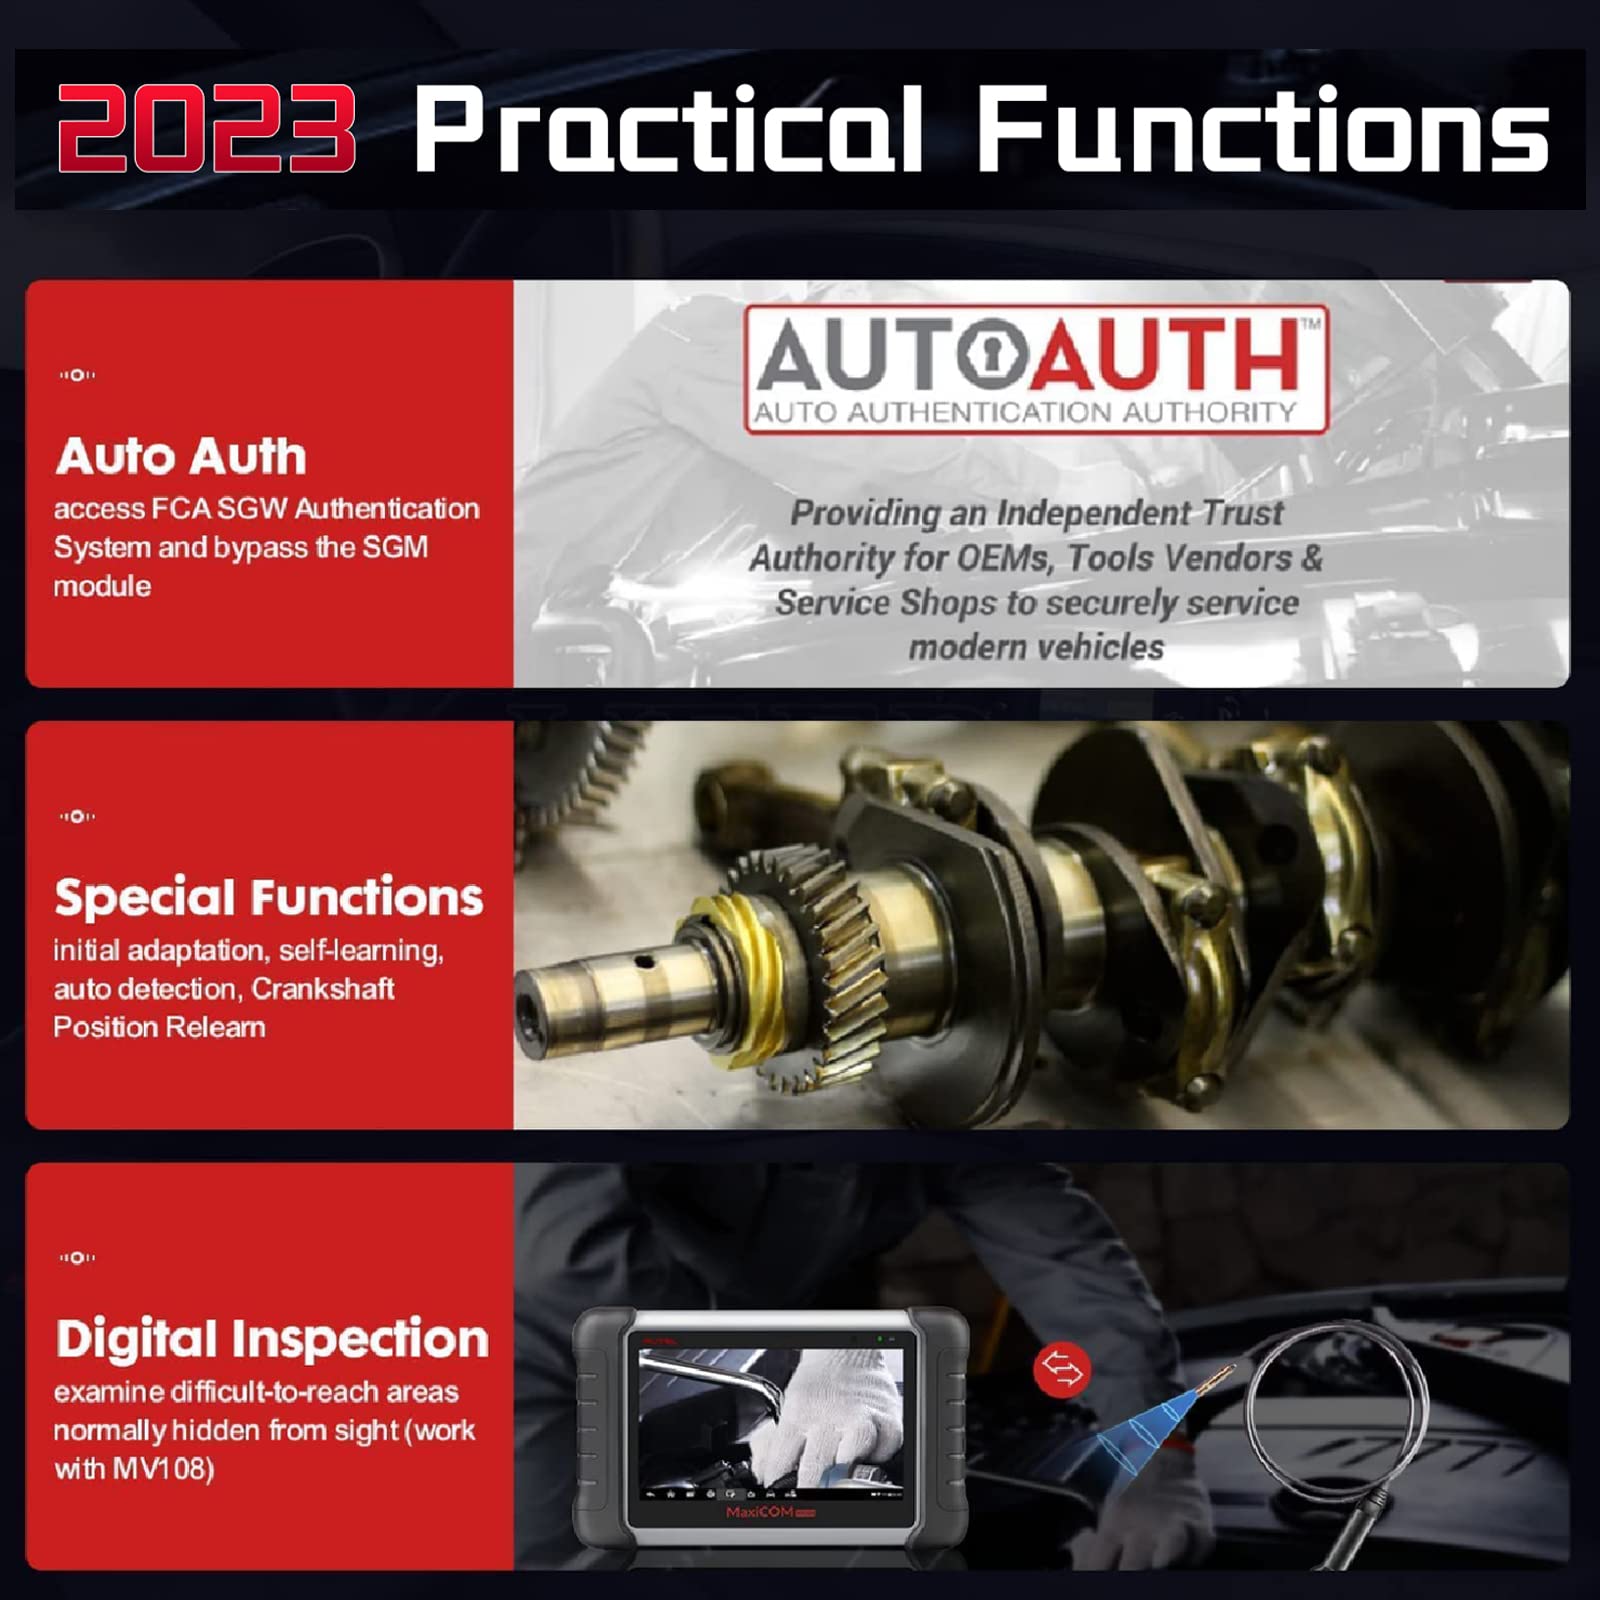 Auto Auth and digital inspection functions of MK808